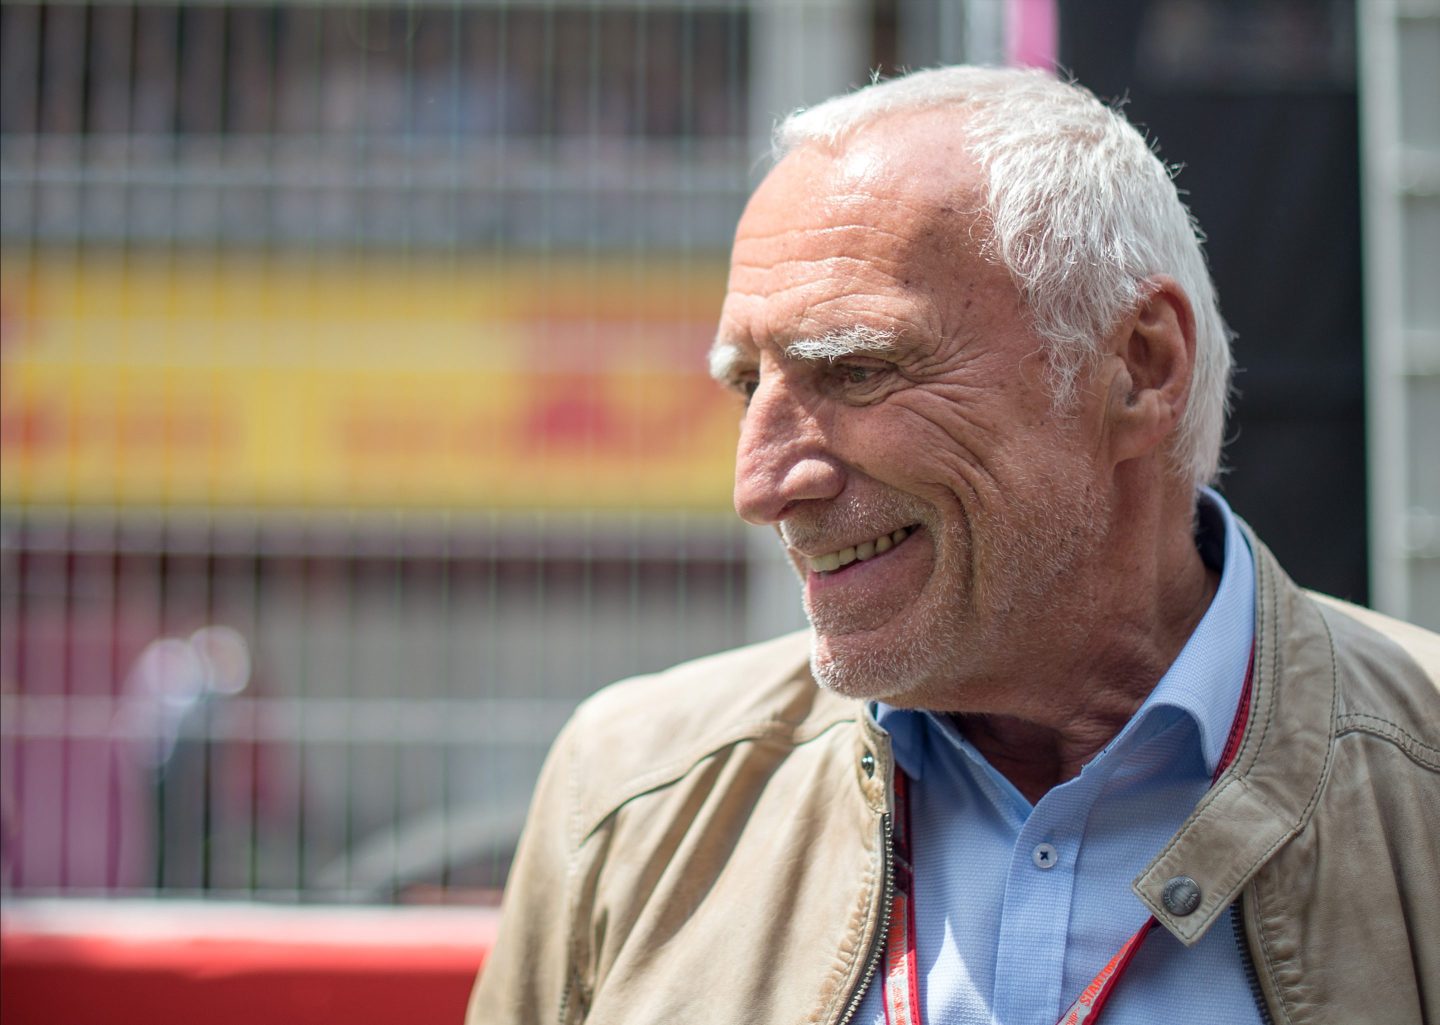 Red Bull’s Dietrich Mateschitz, the Austrian billionaire who transformed F1, soccer, and energy drinks, dies at 78